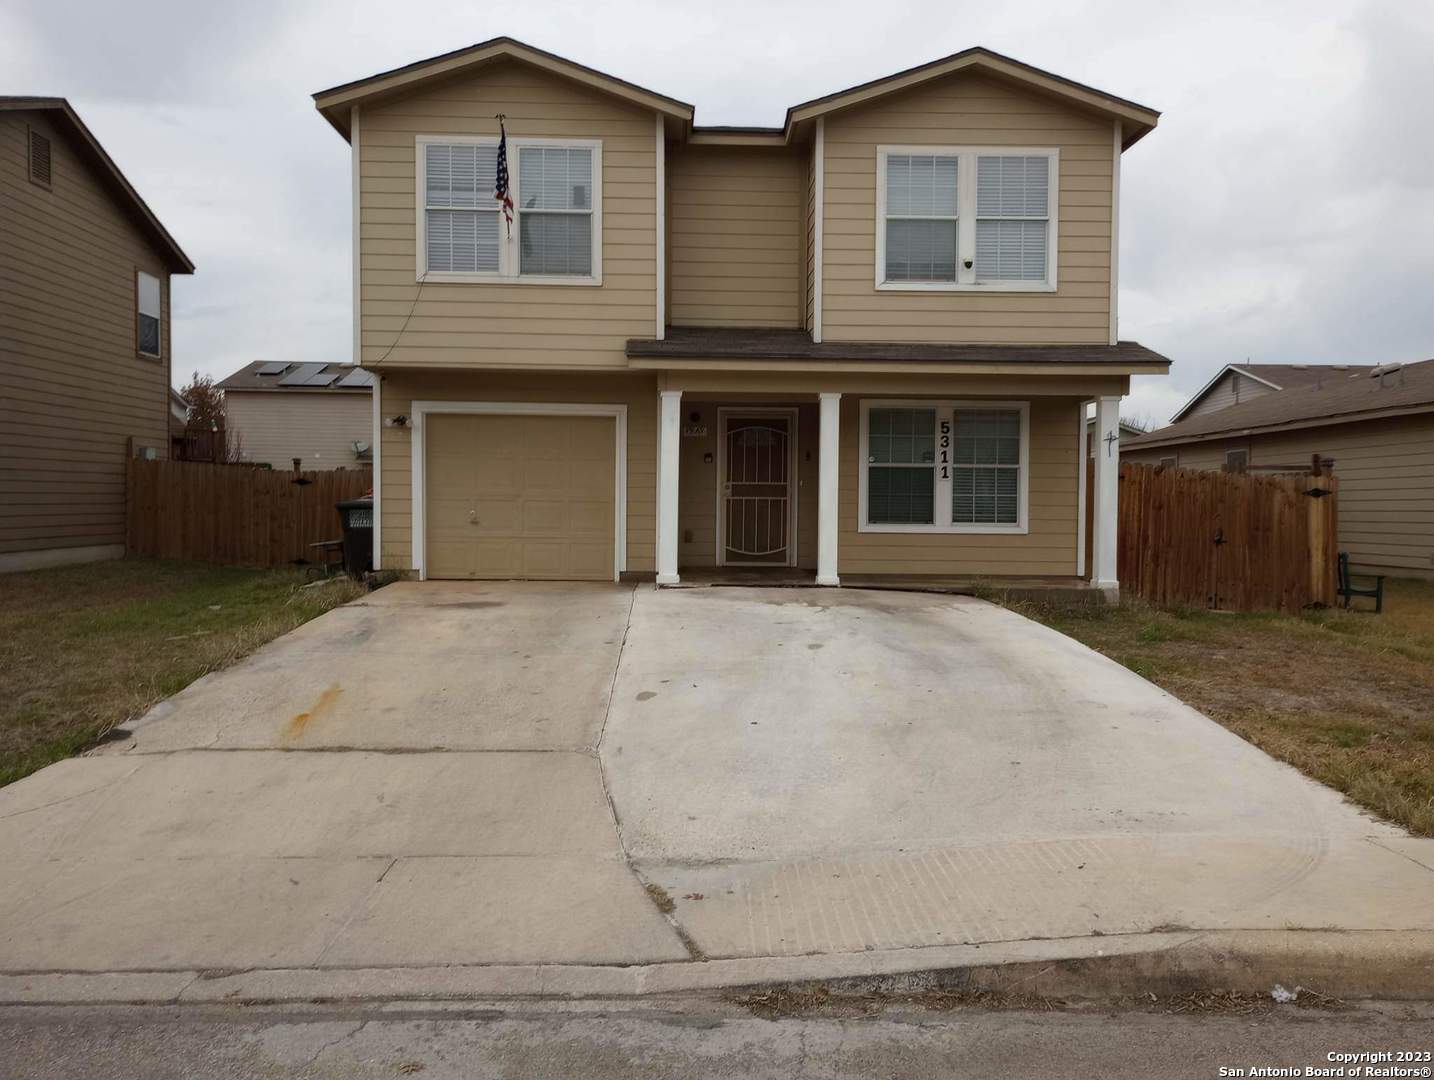 Located less than 15 minutes from Downtown, Medical Center, SeaWorld and Lackland AFB, a BEAUTIFUL home with NEW Roof and Lots of updates (extended driveway, kitchen and bathroom, covered patio and more)  3 bedrooms, 2.5 baths with over 2300 sq ft of spacious living!  Make this home yours and schedule a showing today!